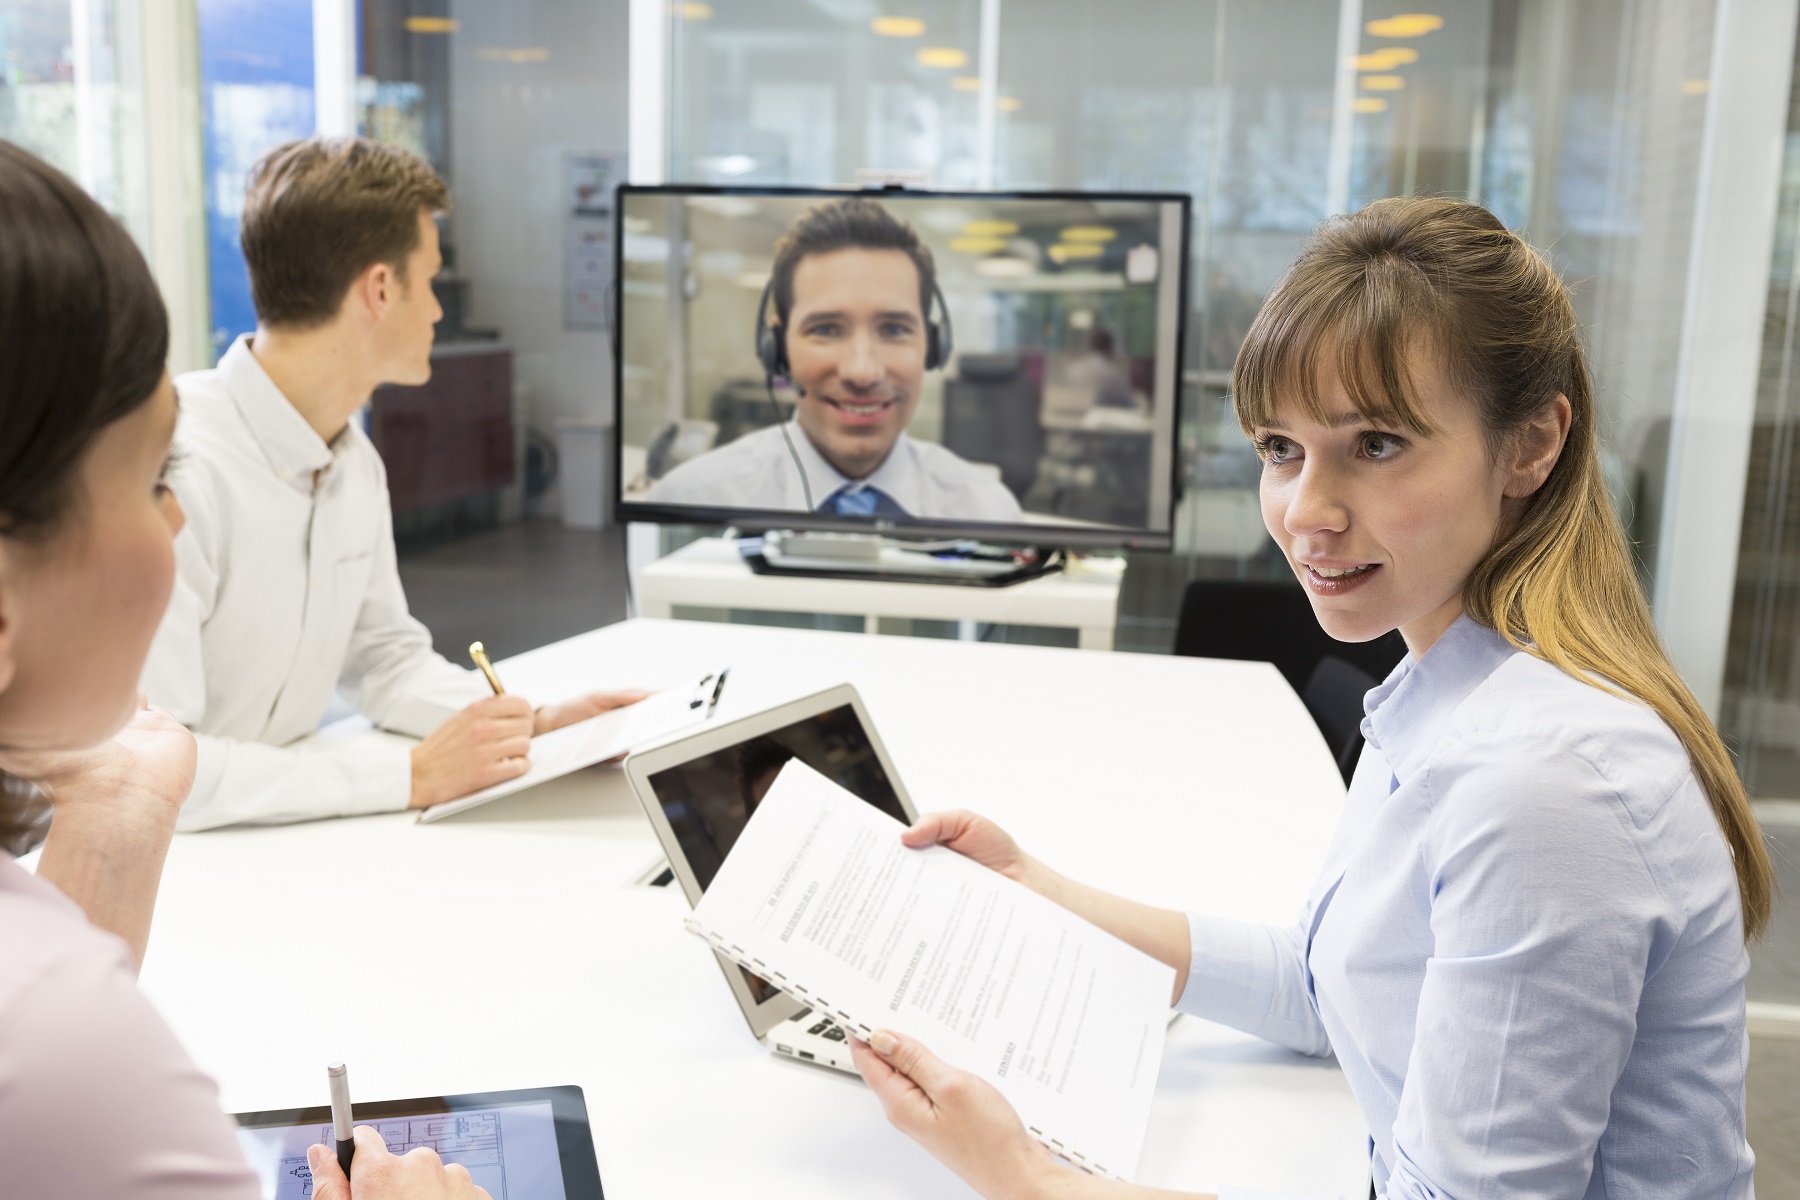 Video Conferencing Benefits